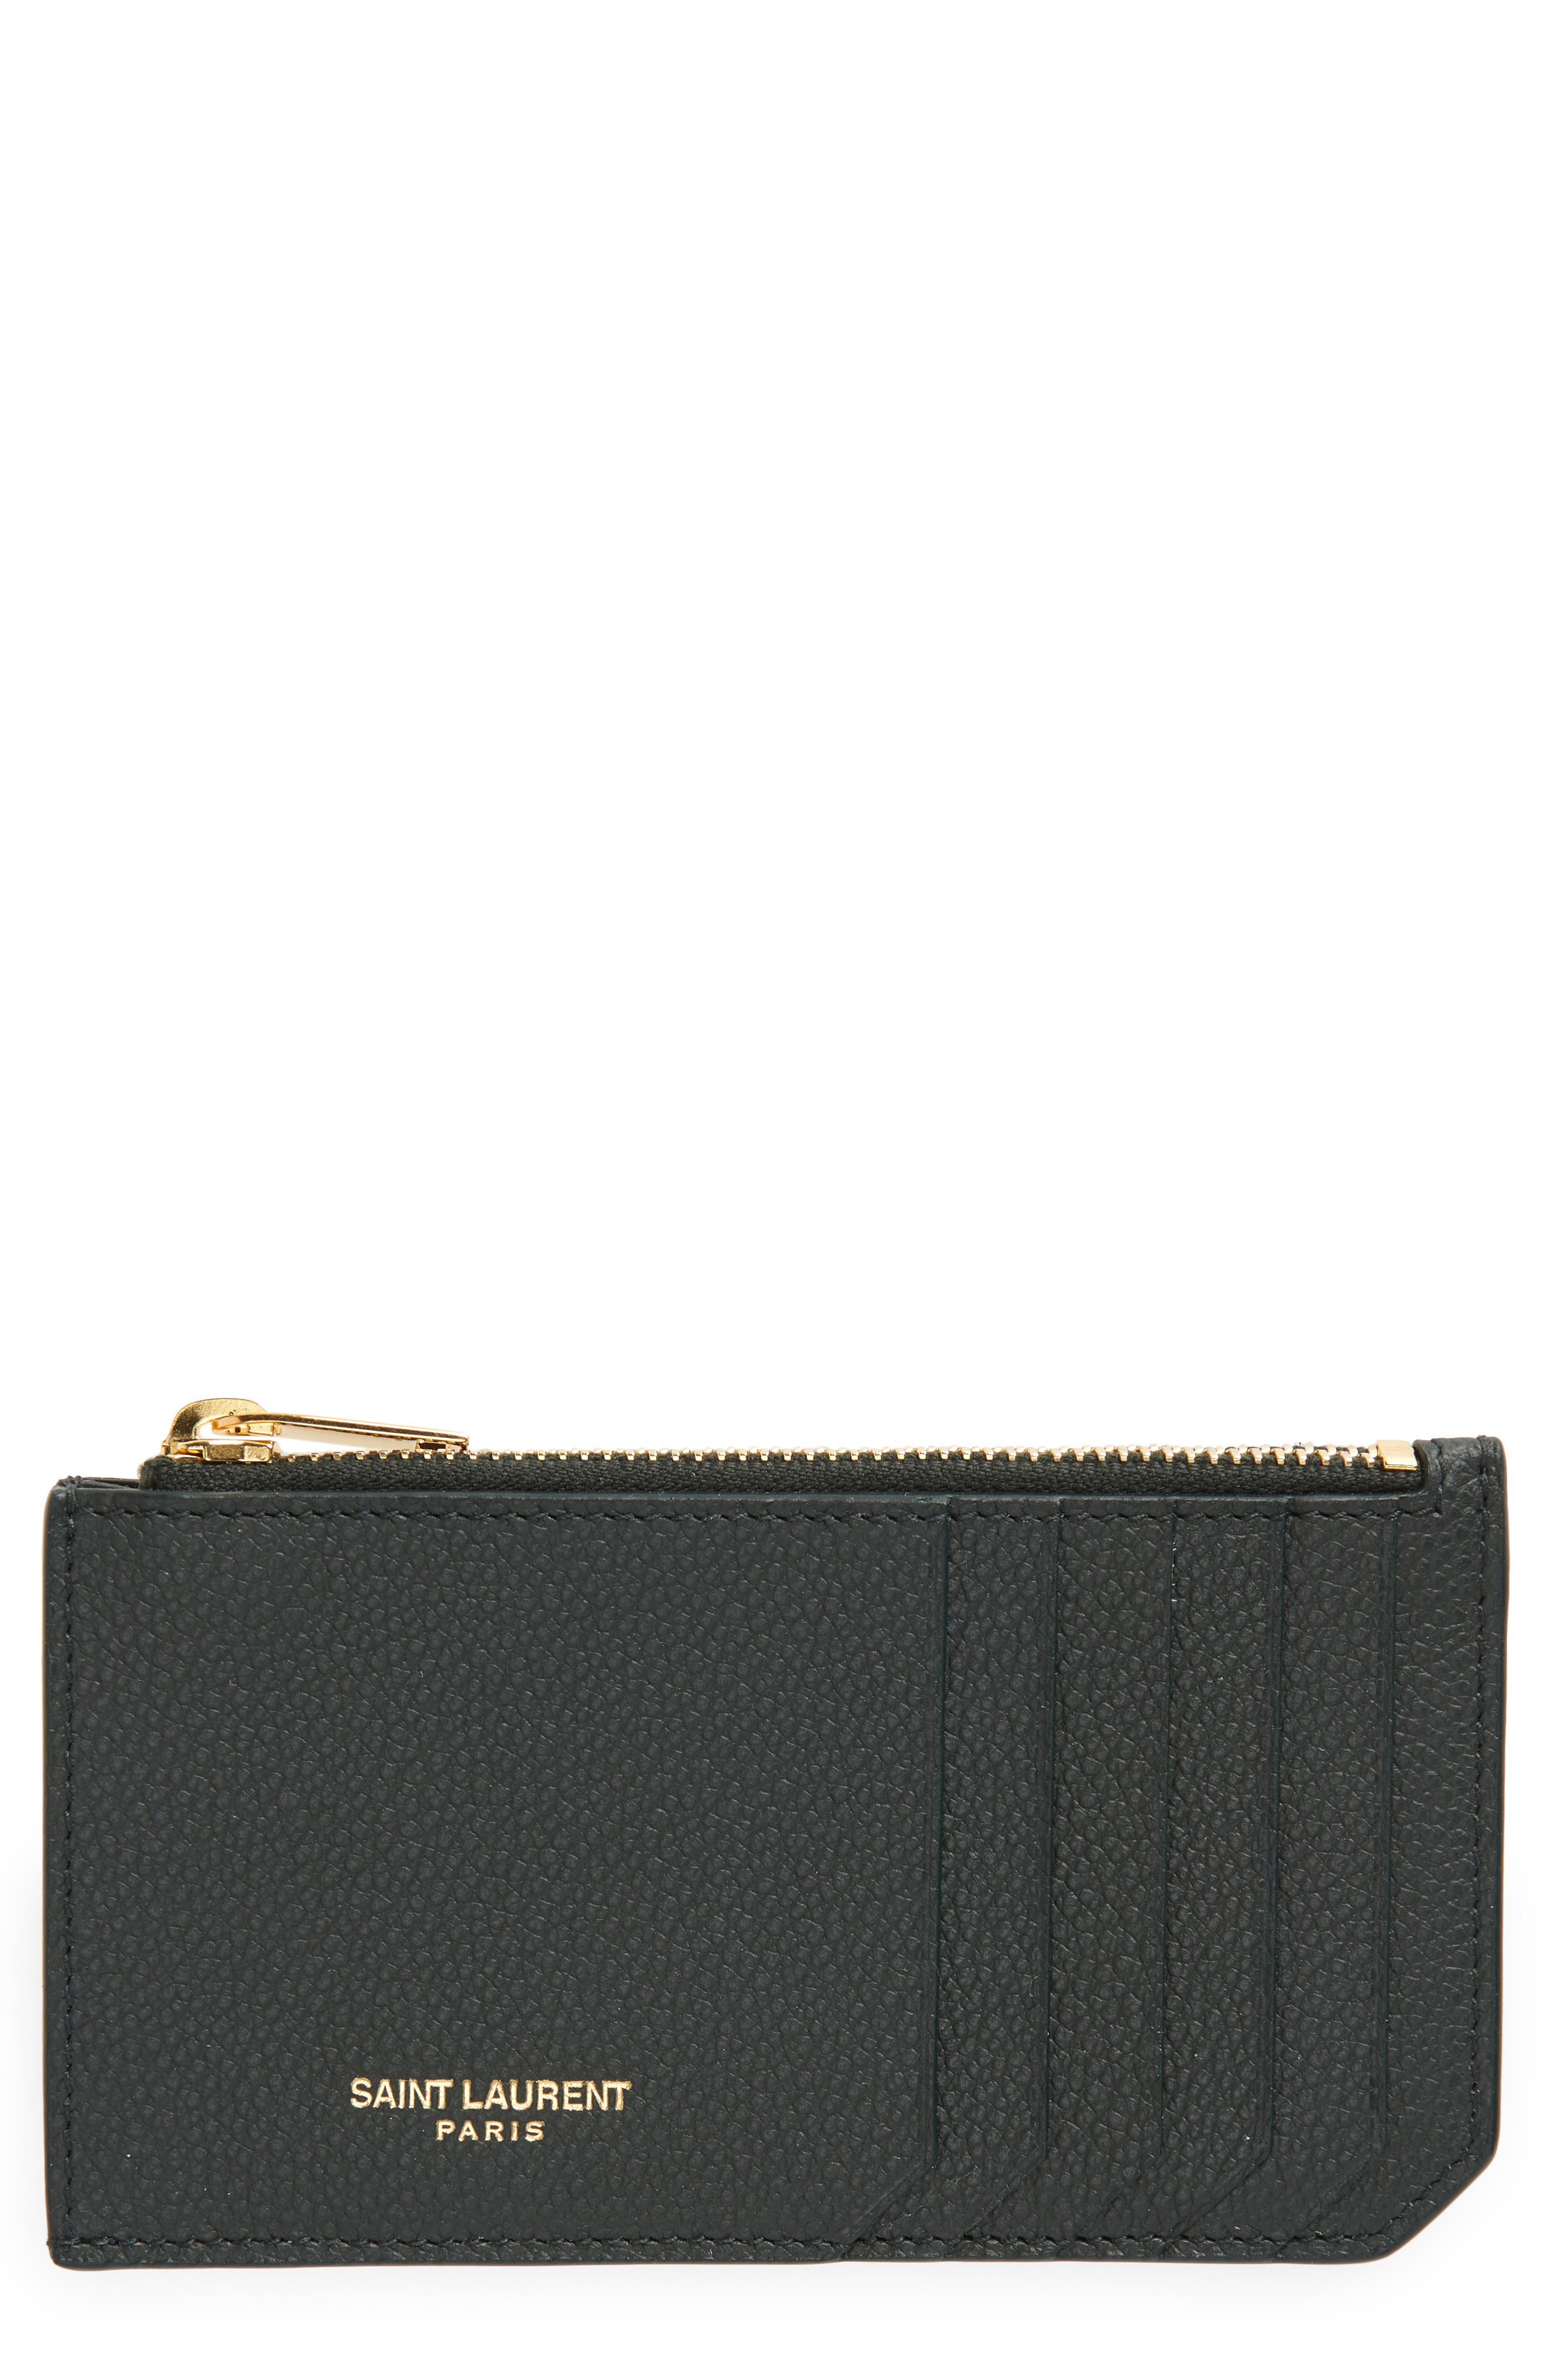 Saint Laurent Fragments Leather Zip Card Case in New Vert Fonce at Nordstrom